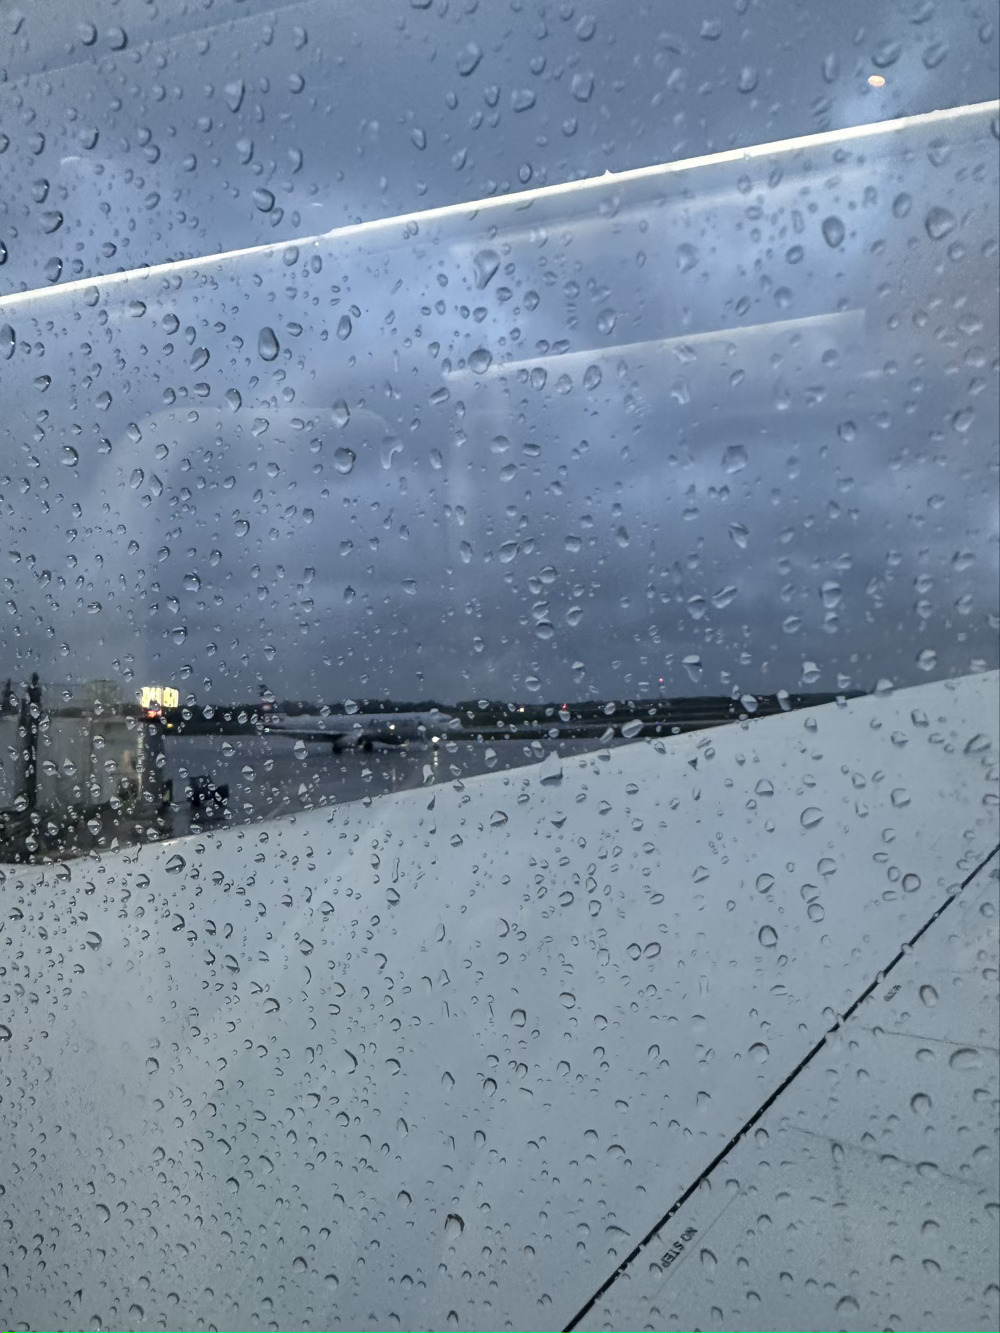 Raindrops on window with plane taxiing in the background.